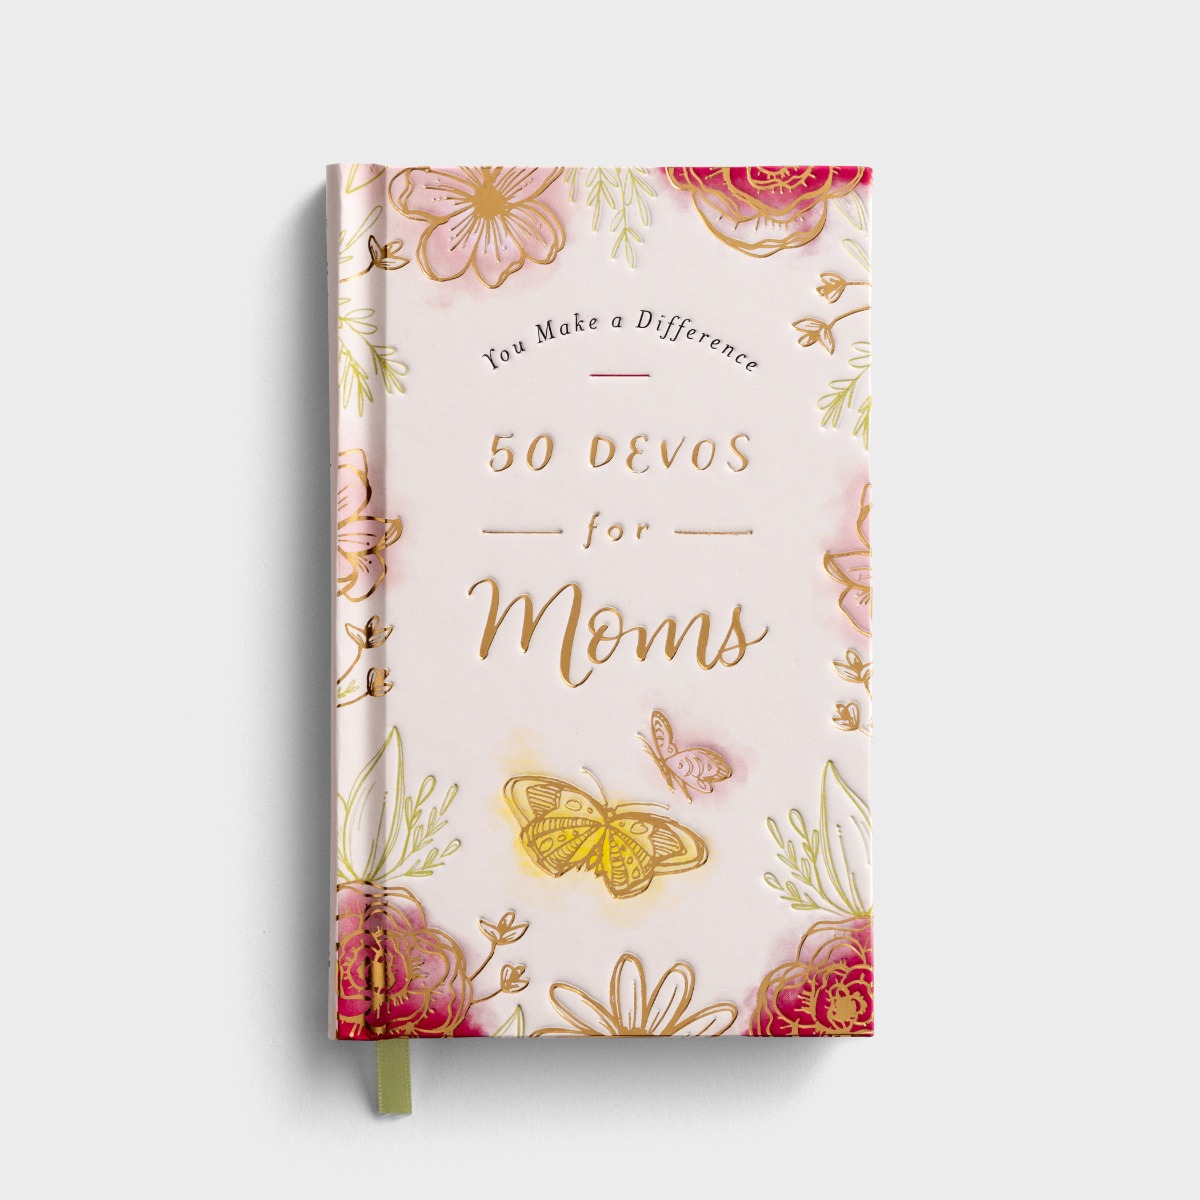 You Make A Difference: 50 Devos For Moms